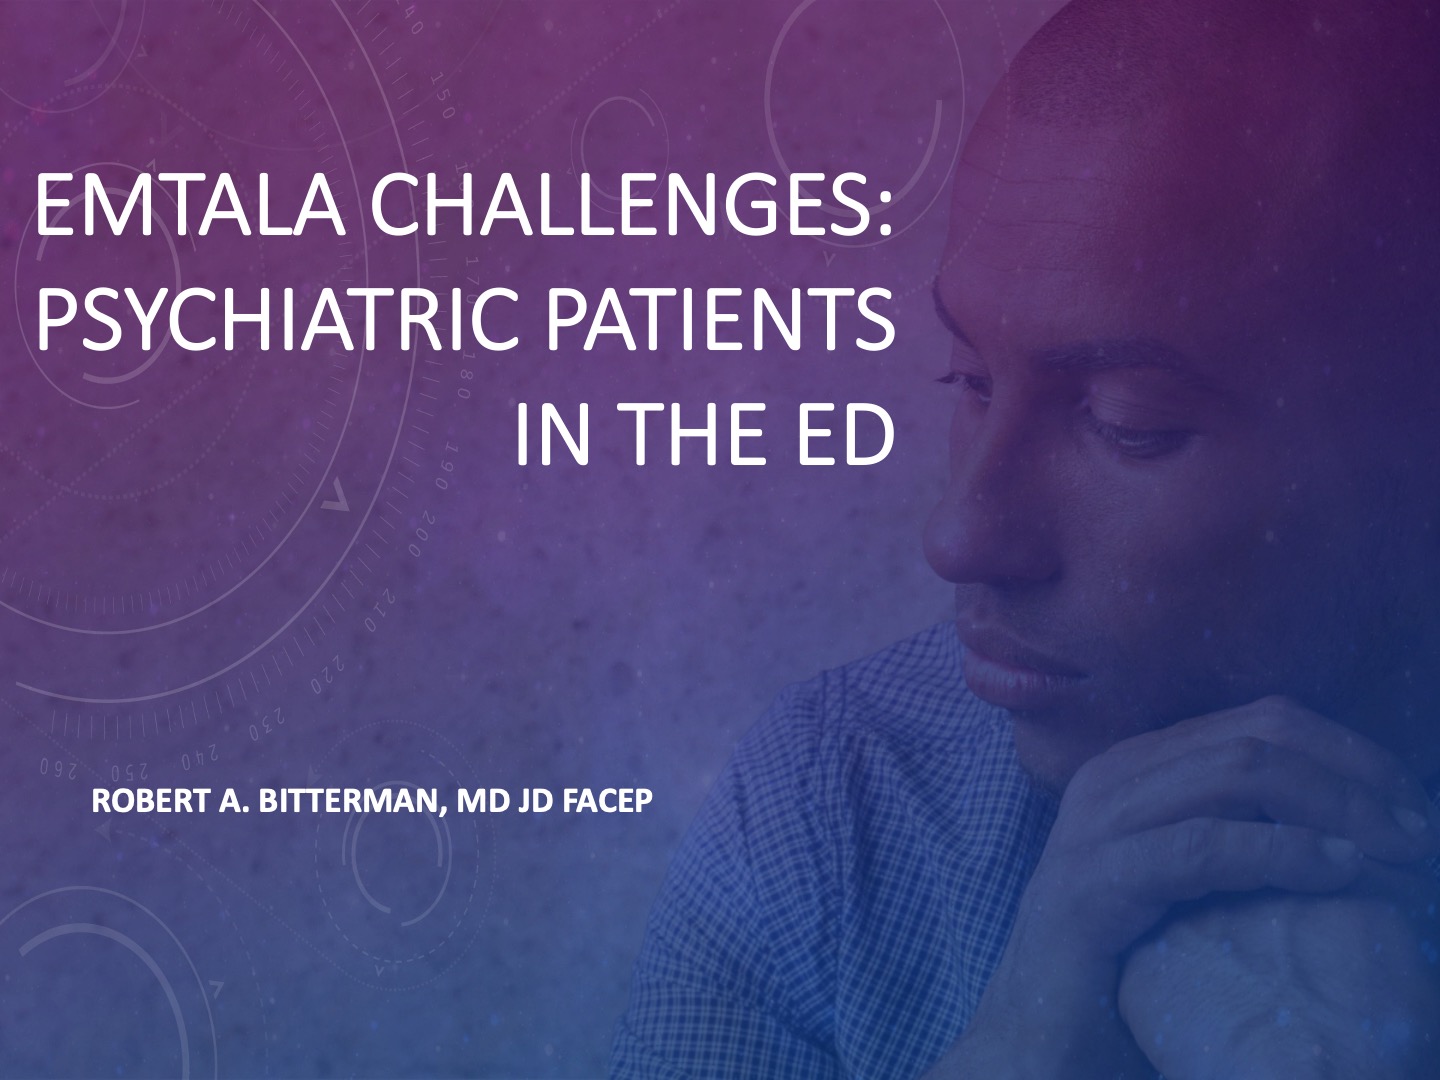 EMTALA Challenges - Psychiatric Patients in the ED